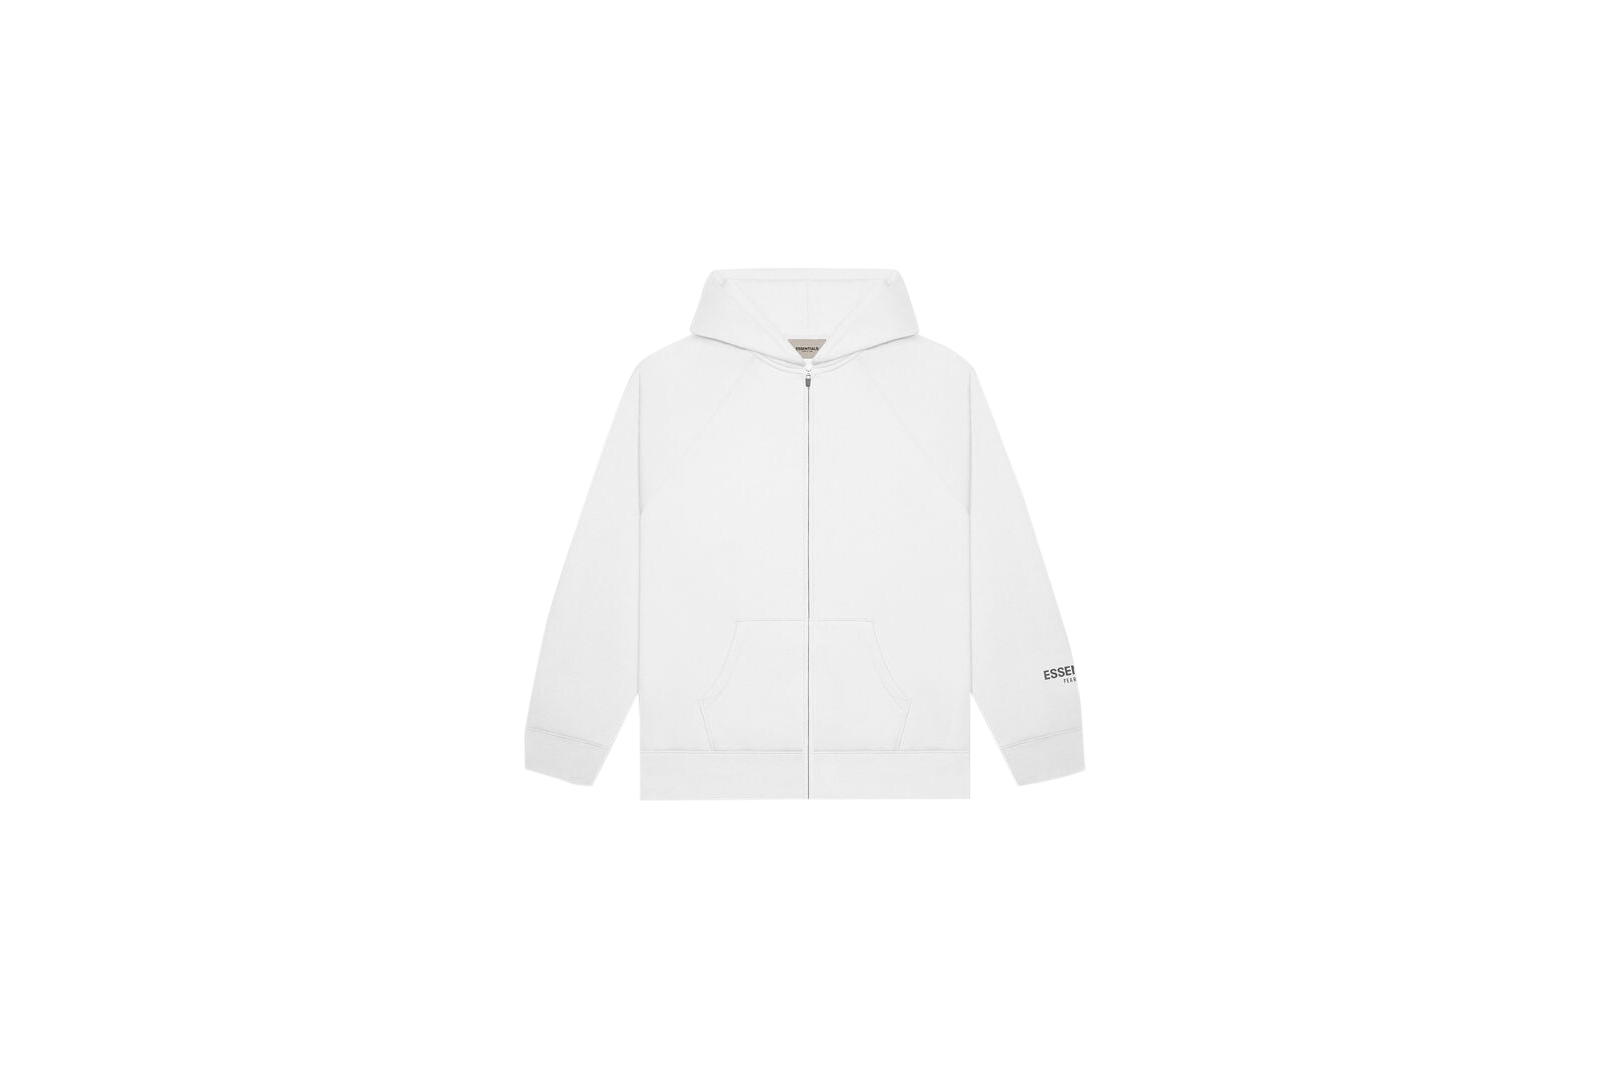 Fear of God Essentials 3D Silicon Applique Full Zip Up Hoodie White